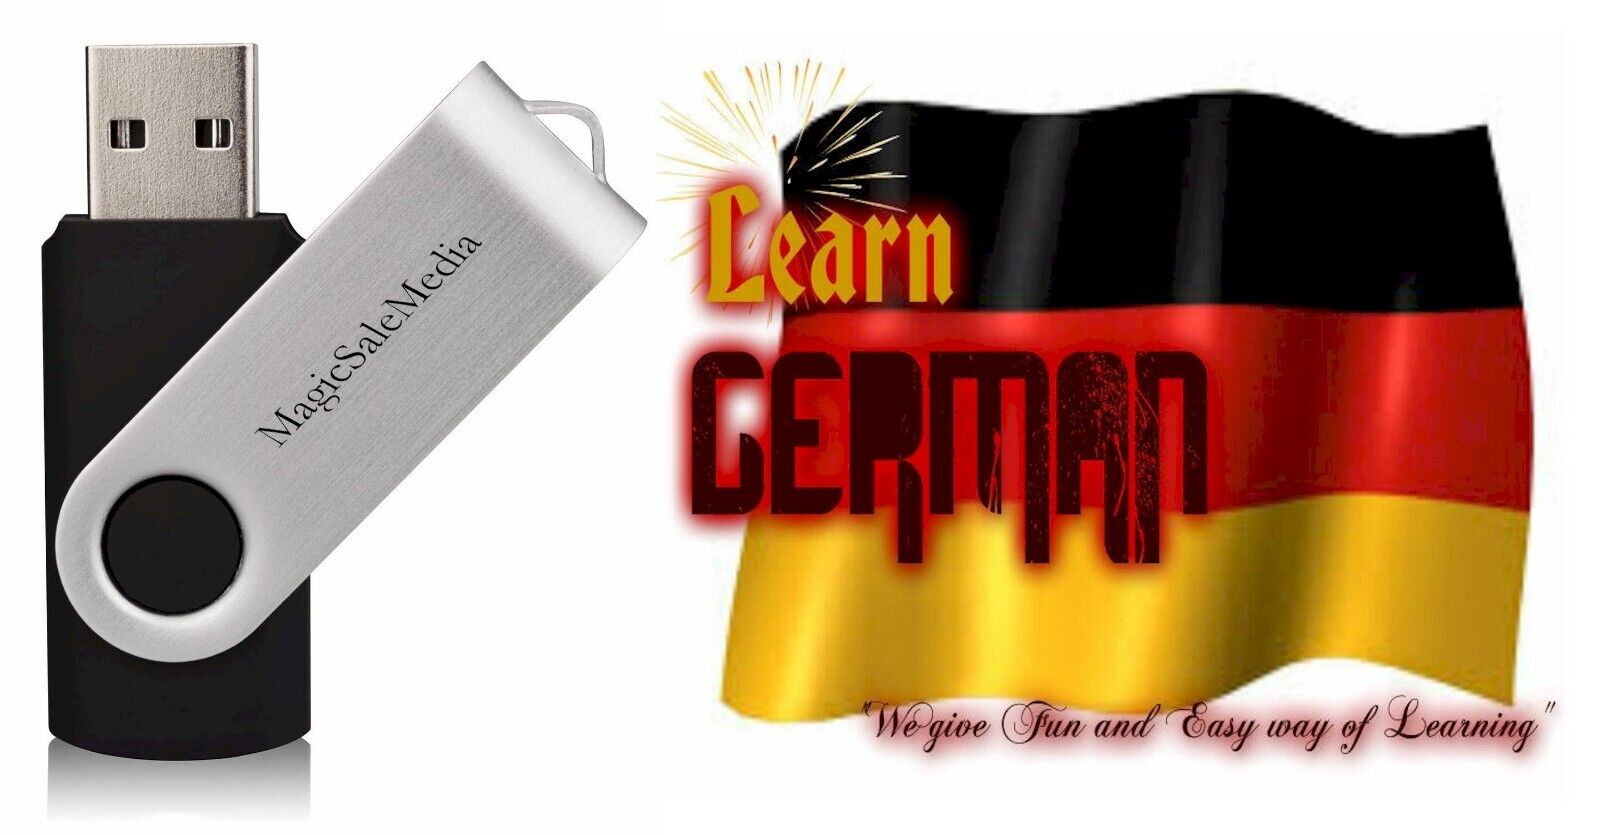 Learn German Fast - The Most Complete & Comprehensive Language Course on USB